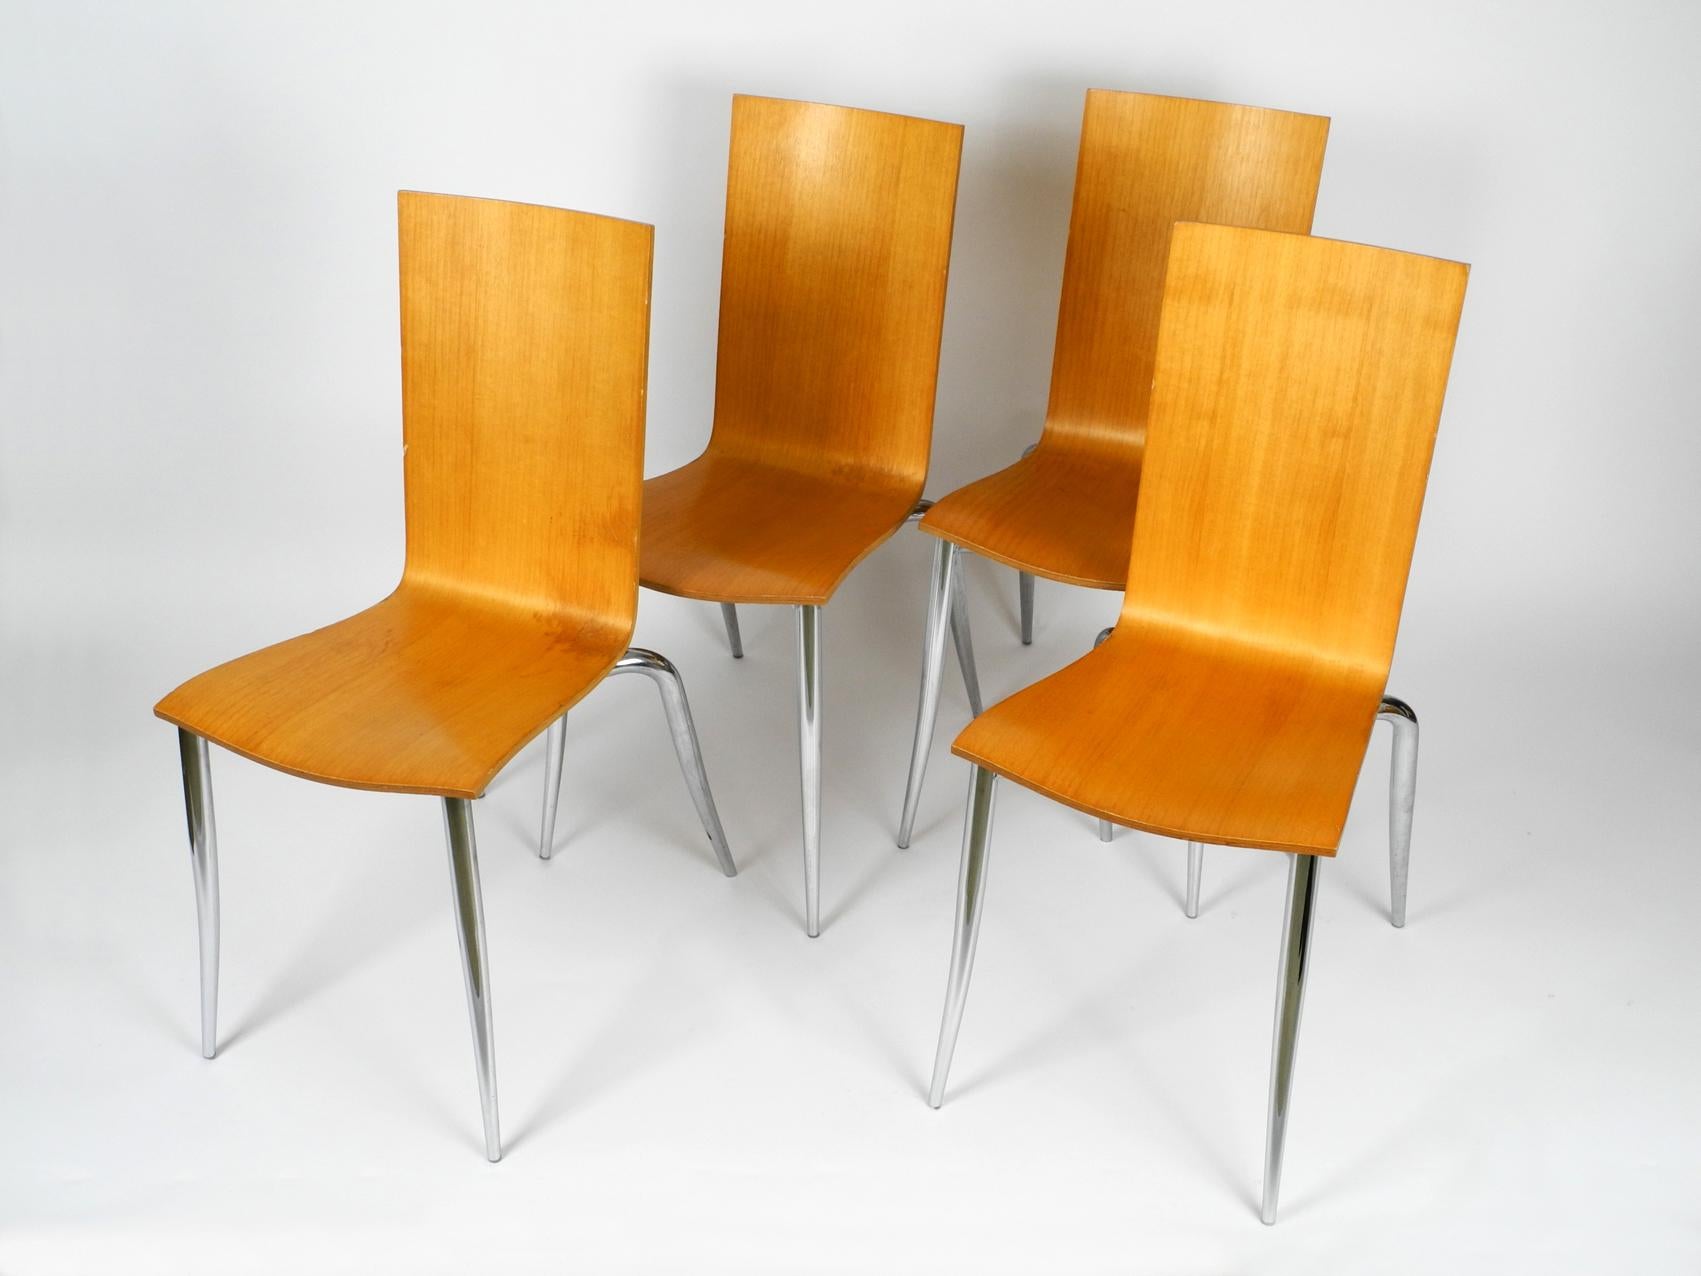 Set of 4 Olly Tango Chairs by Philippe Starck for Driade Aleph, Made in  Italy